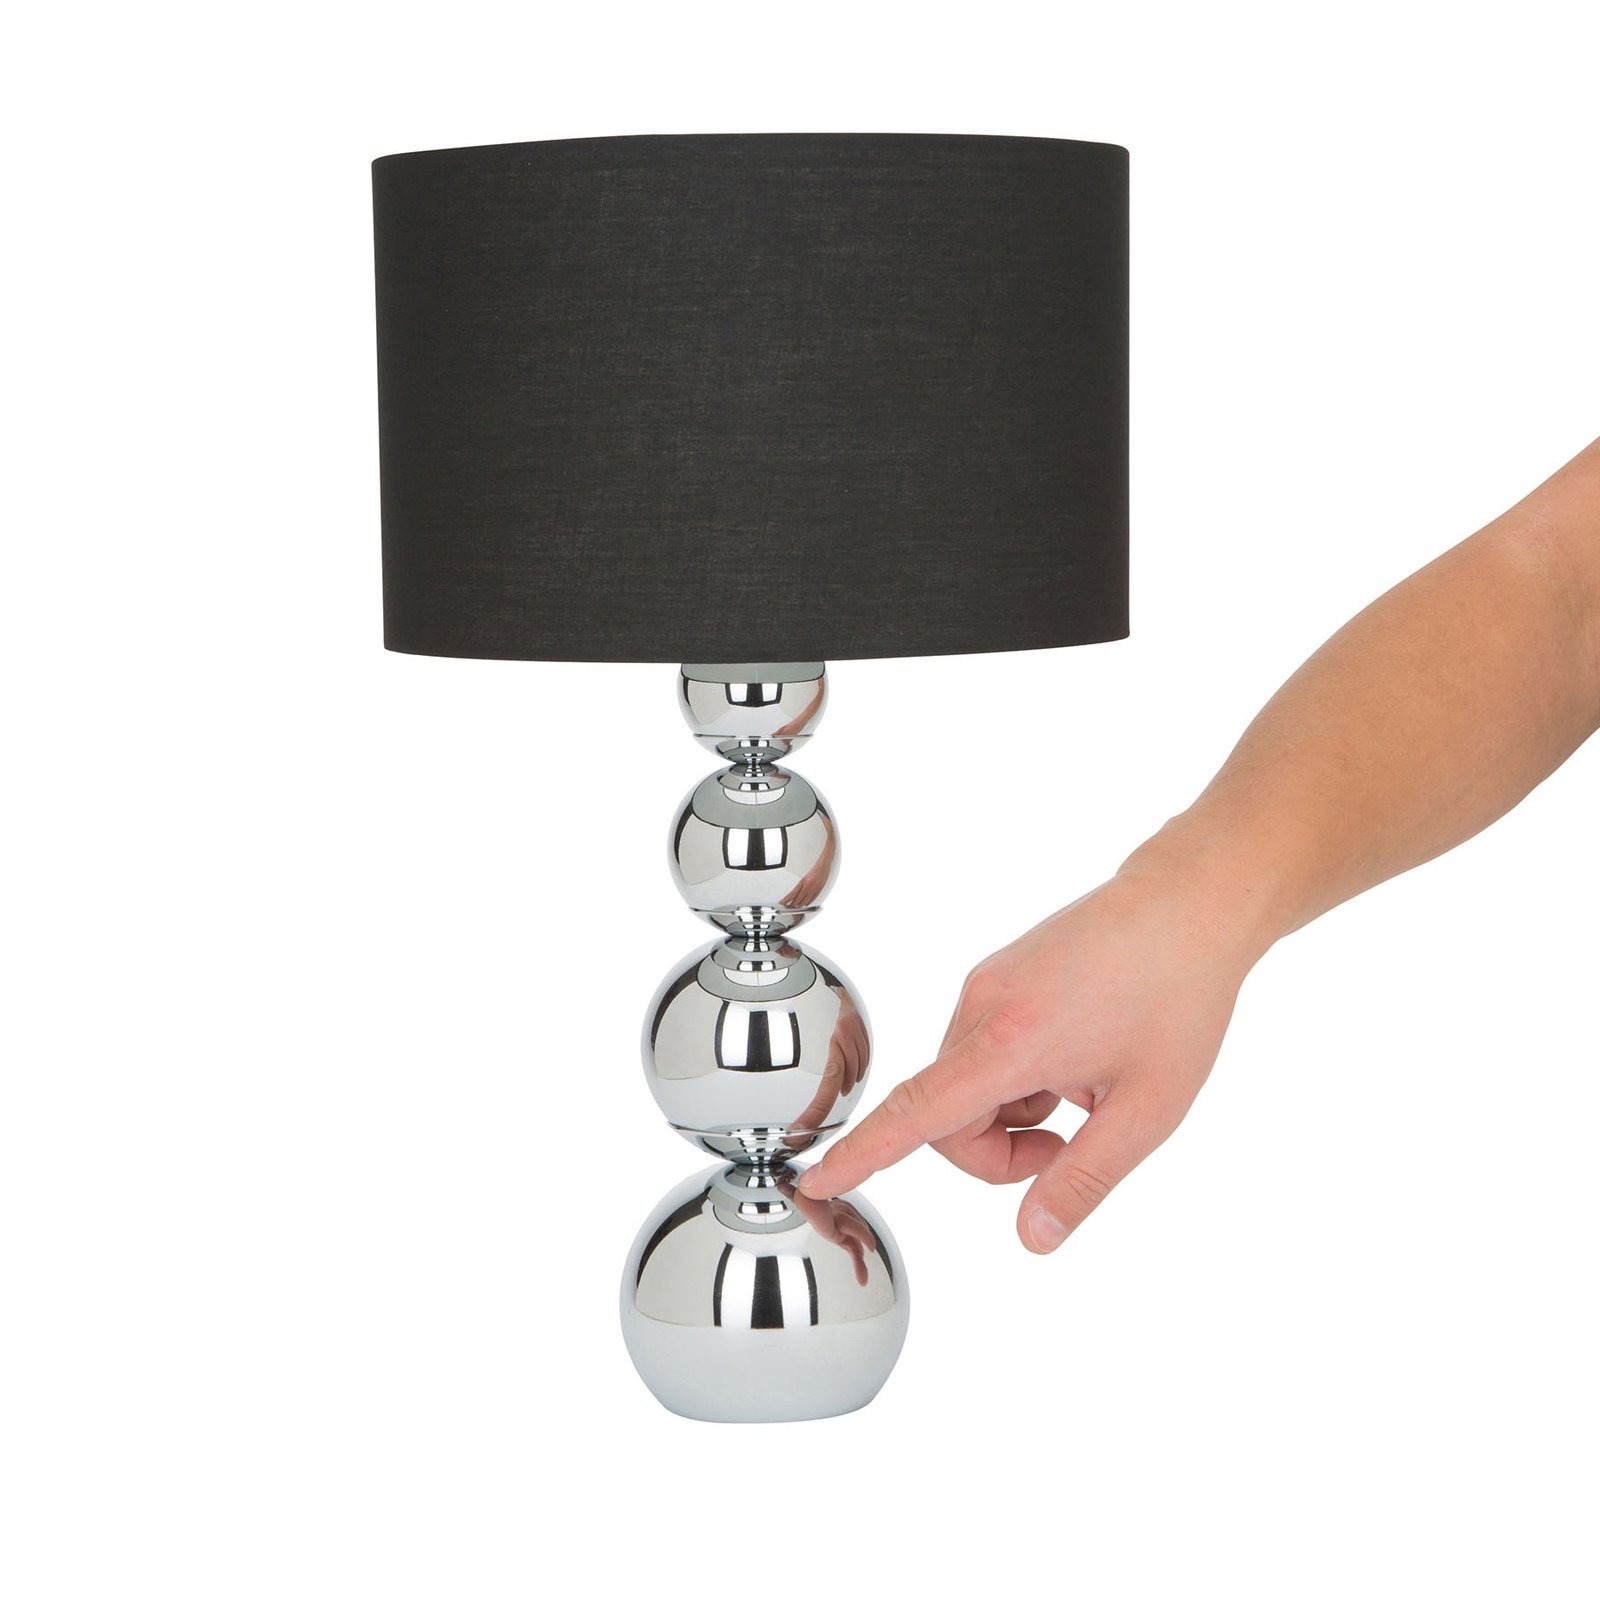 Mandy table lamp, black, touch function